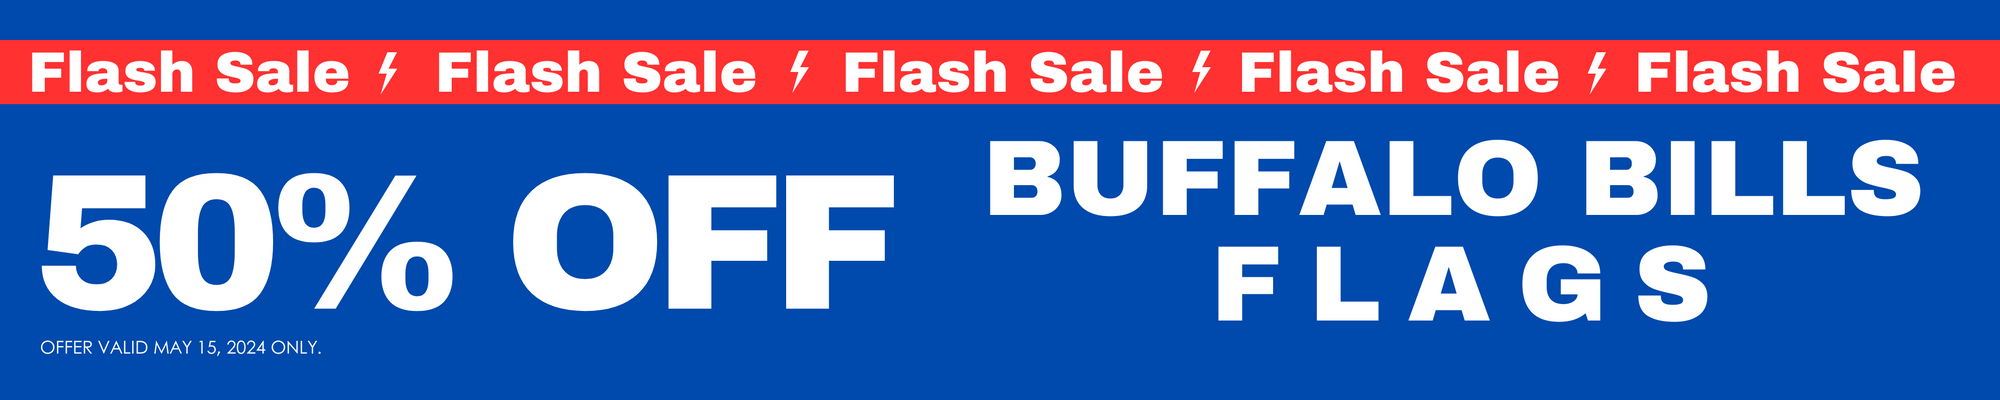 flash sale 50% off buffalo bills flags offer valid may 15 2024 only